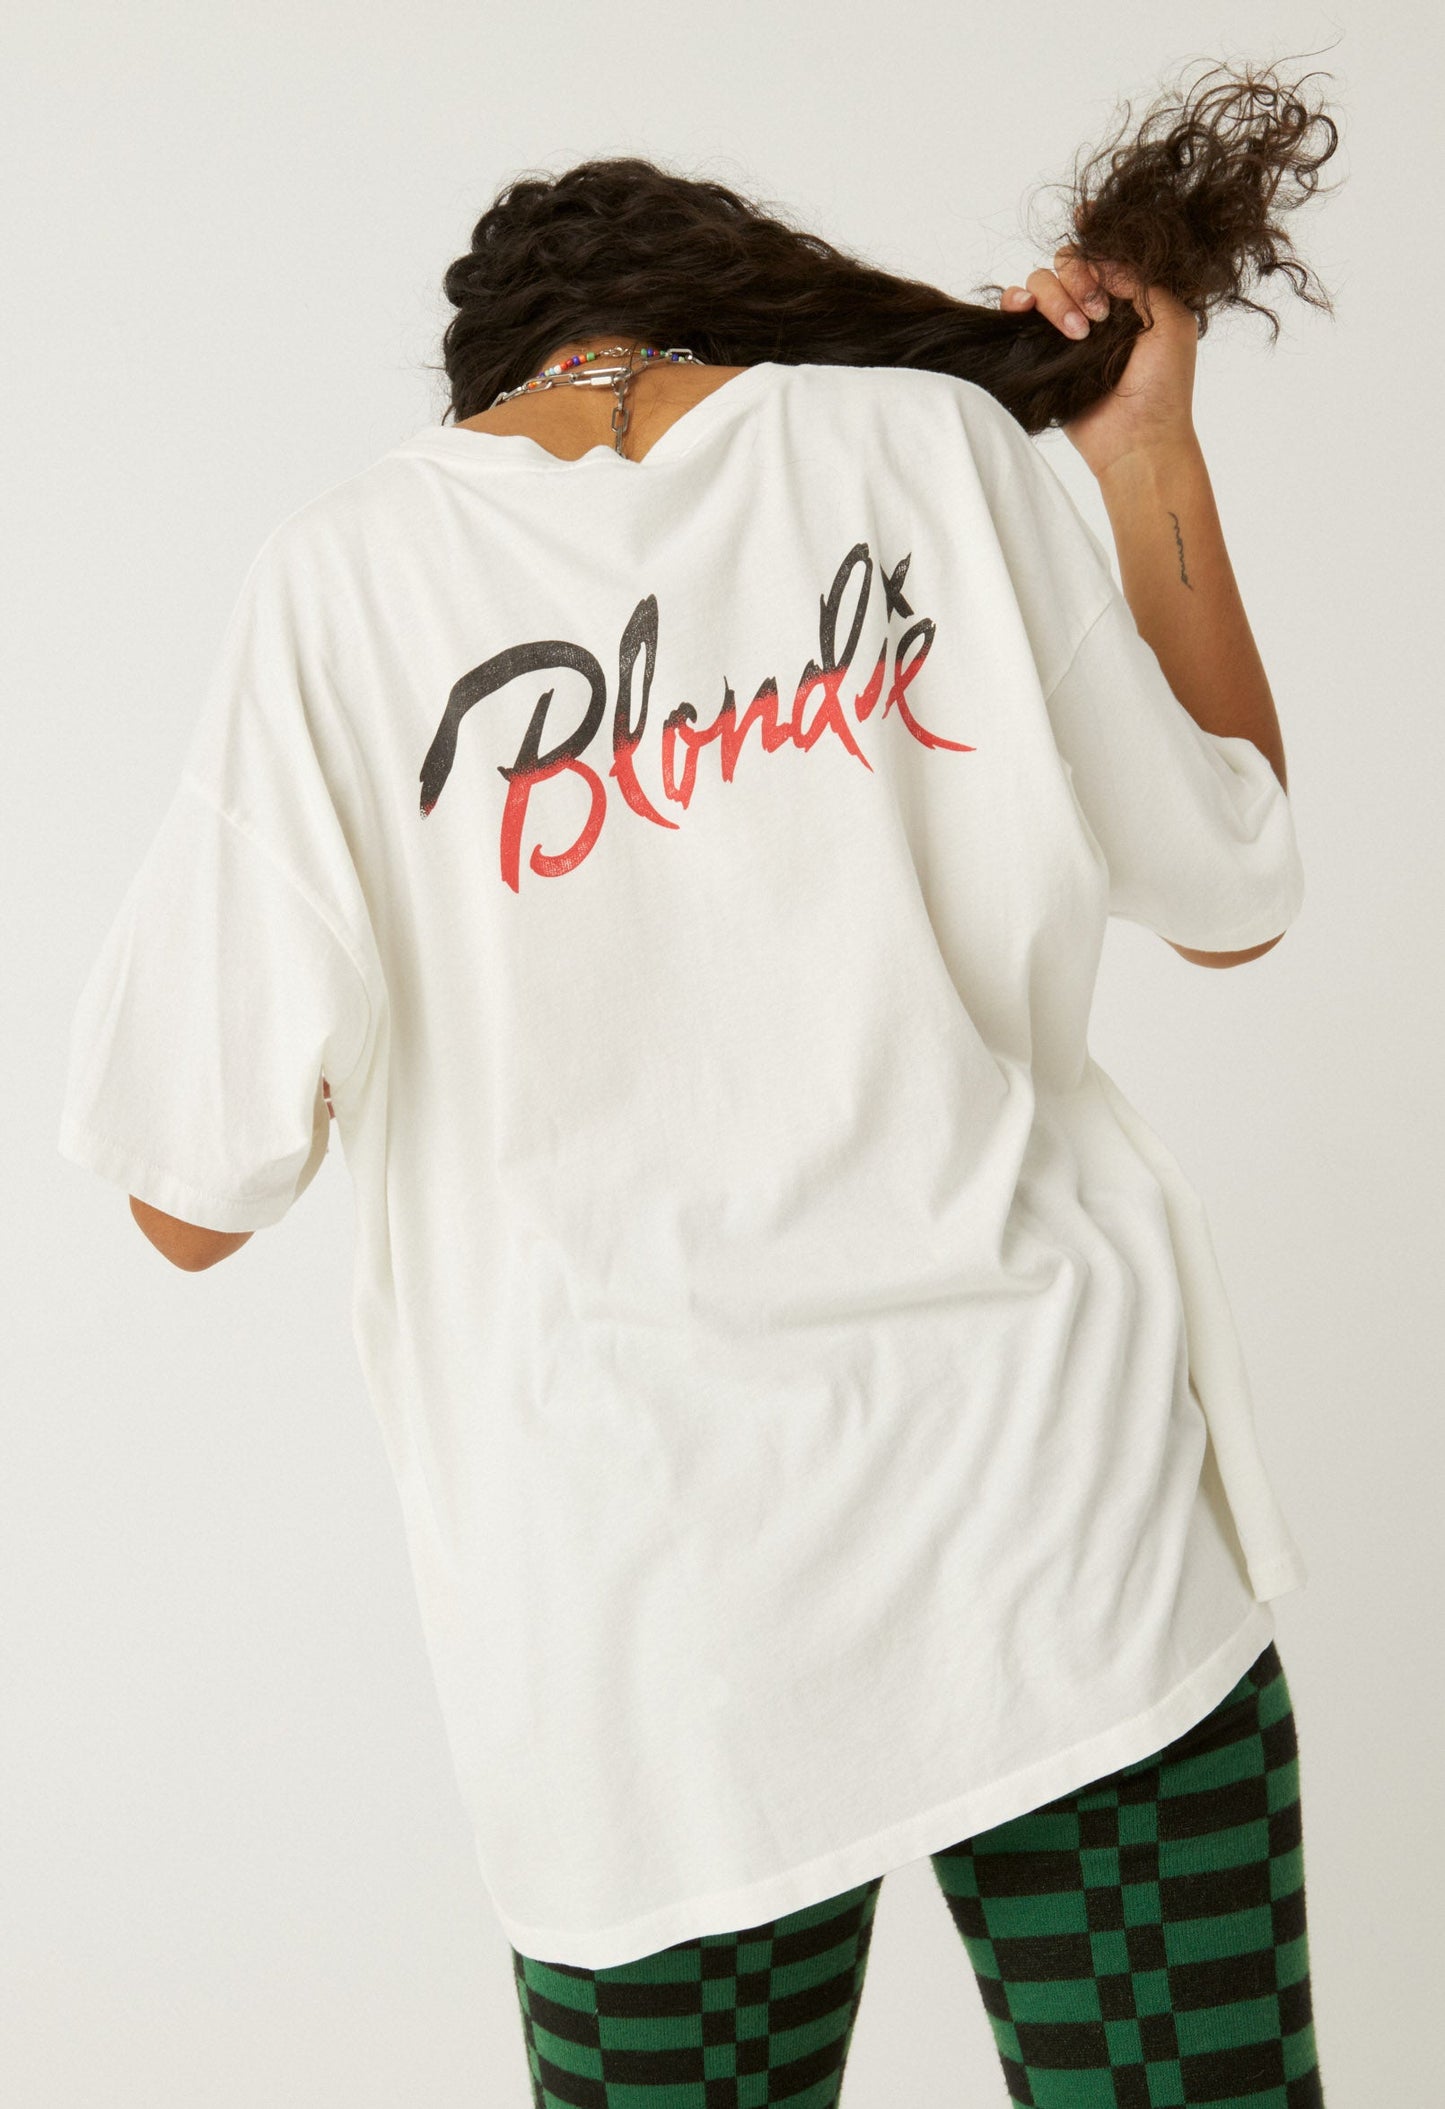 Daydreamer Blondie Eat To The Beat Tee